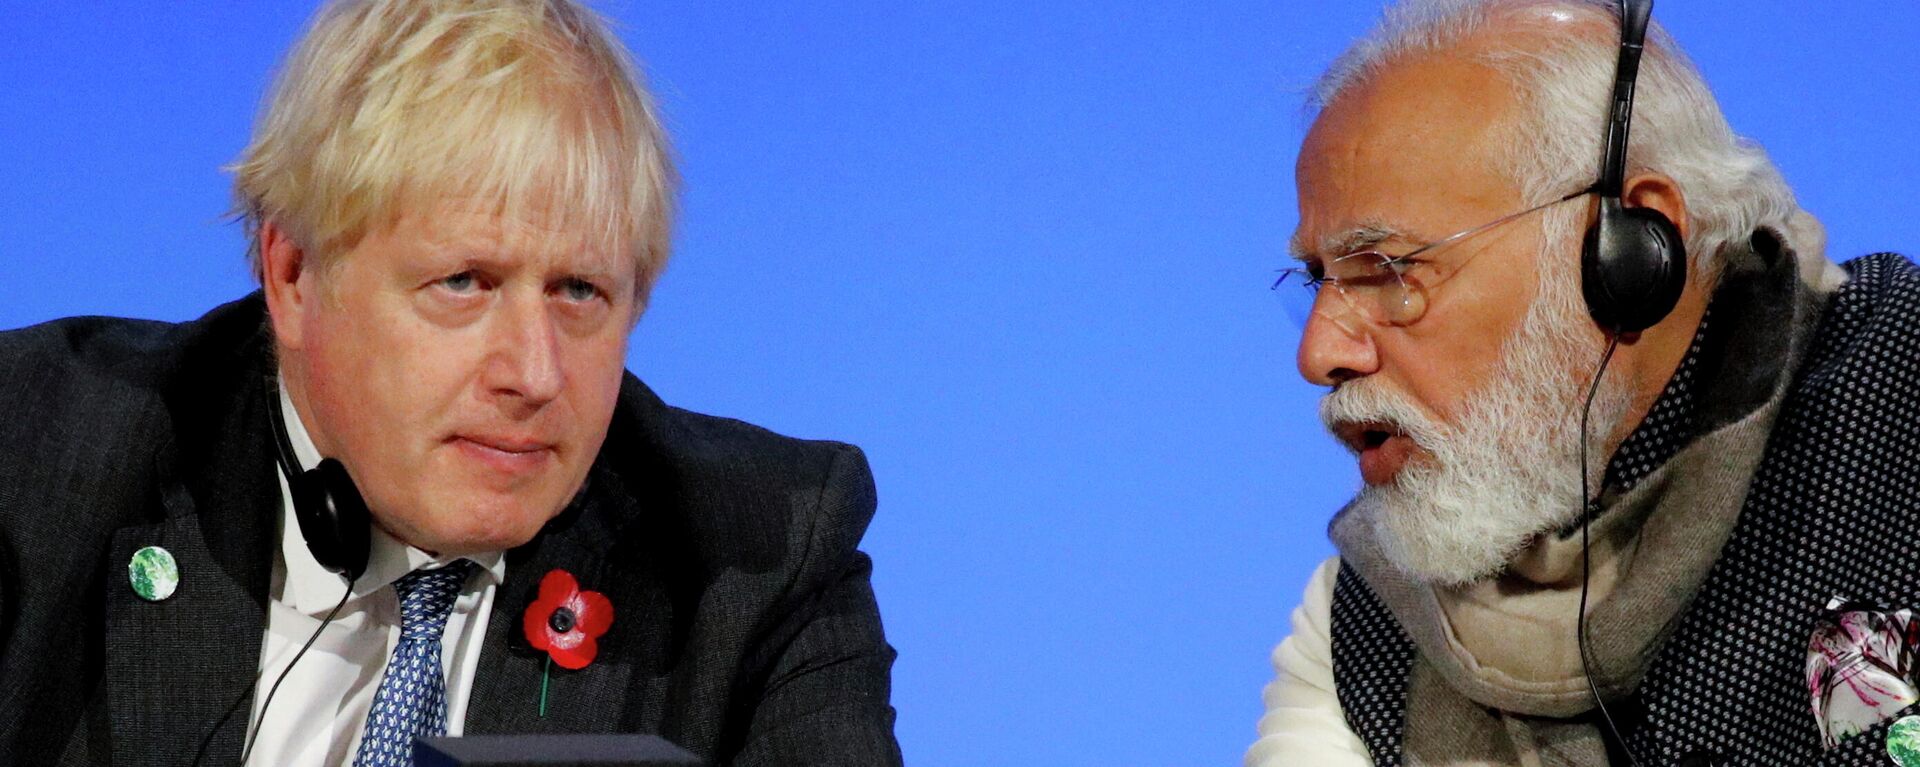 Britain's Prime Minister Boris Johnson, left, and India's Prime Minister Narendra Modi attend a meeting during the UN Climate Change Conference COP26 in Glasgow, Scotland, Tuesday, Nov. 2, 2021 - Sputnik International, 1920, 21.01.2022